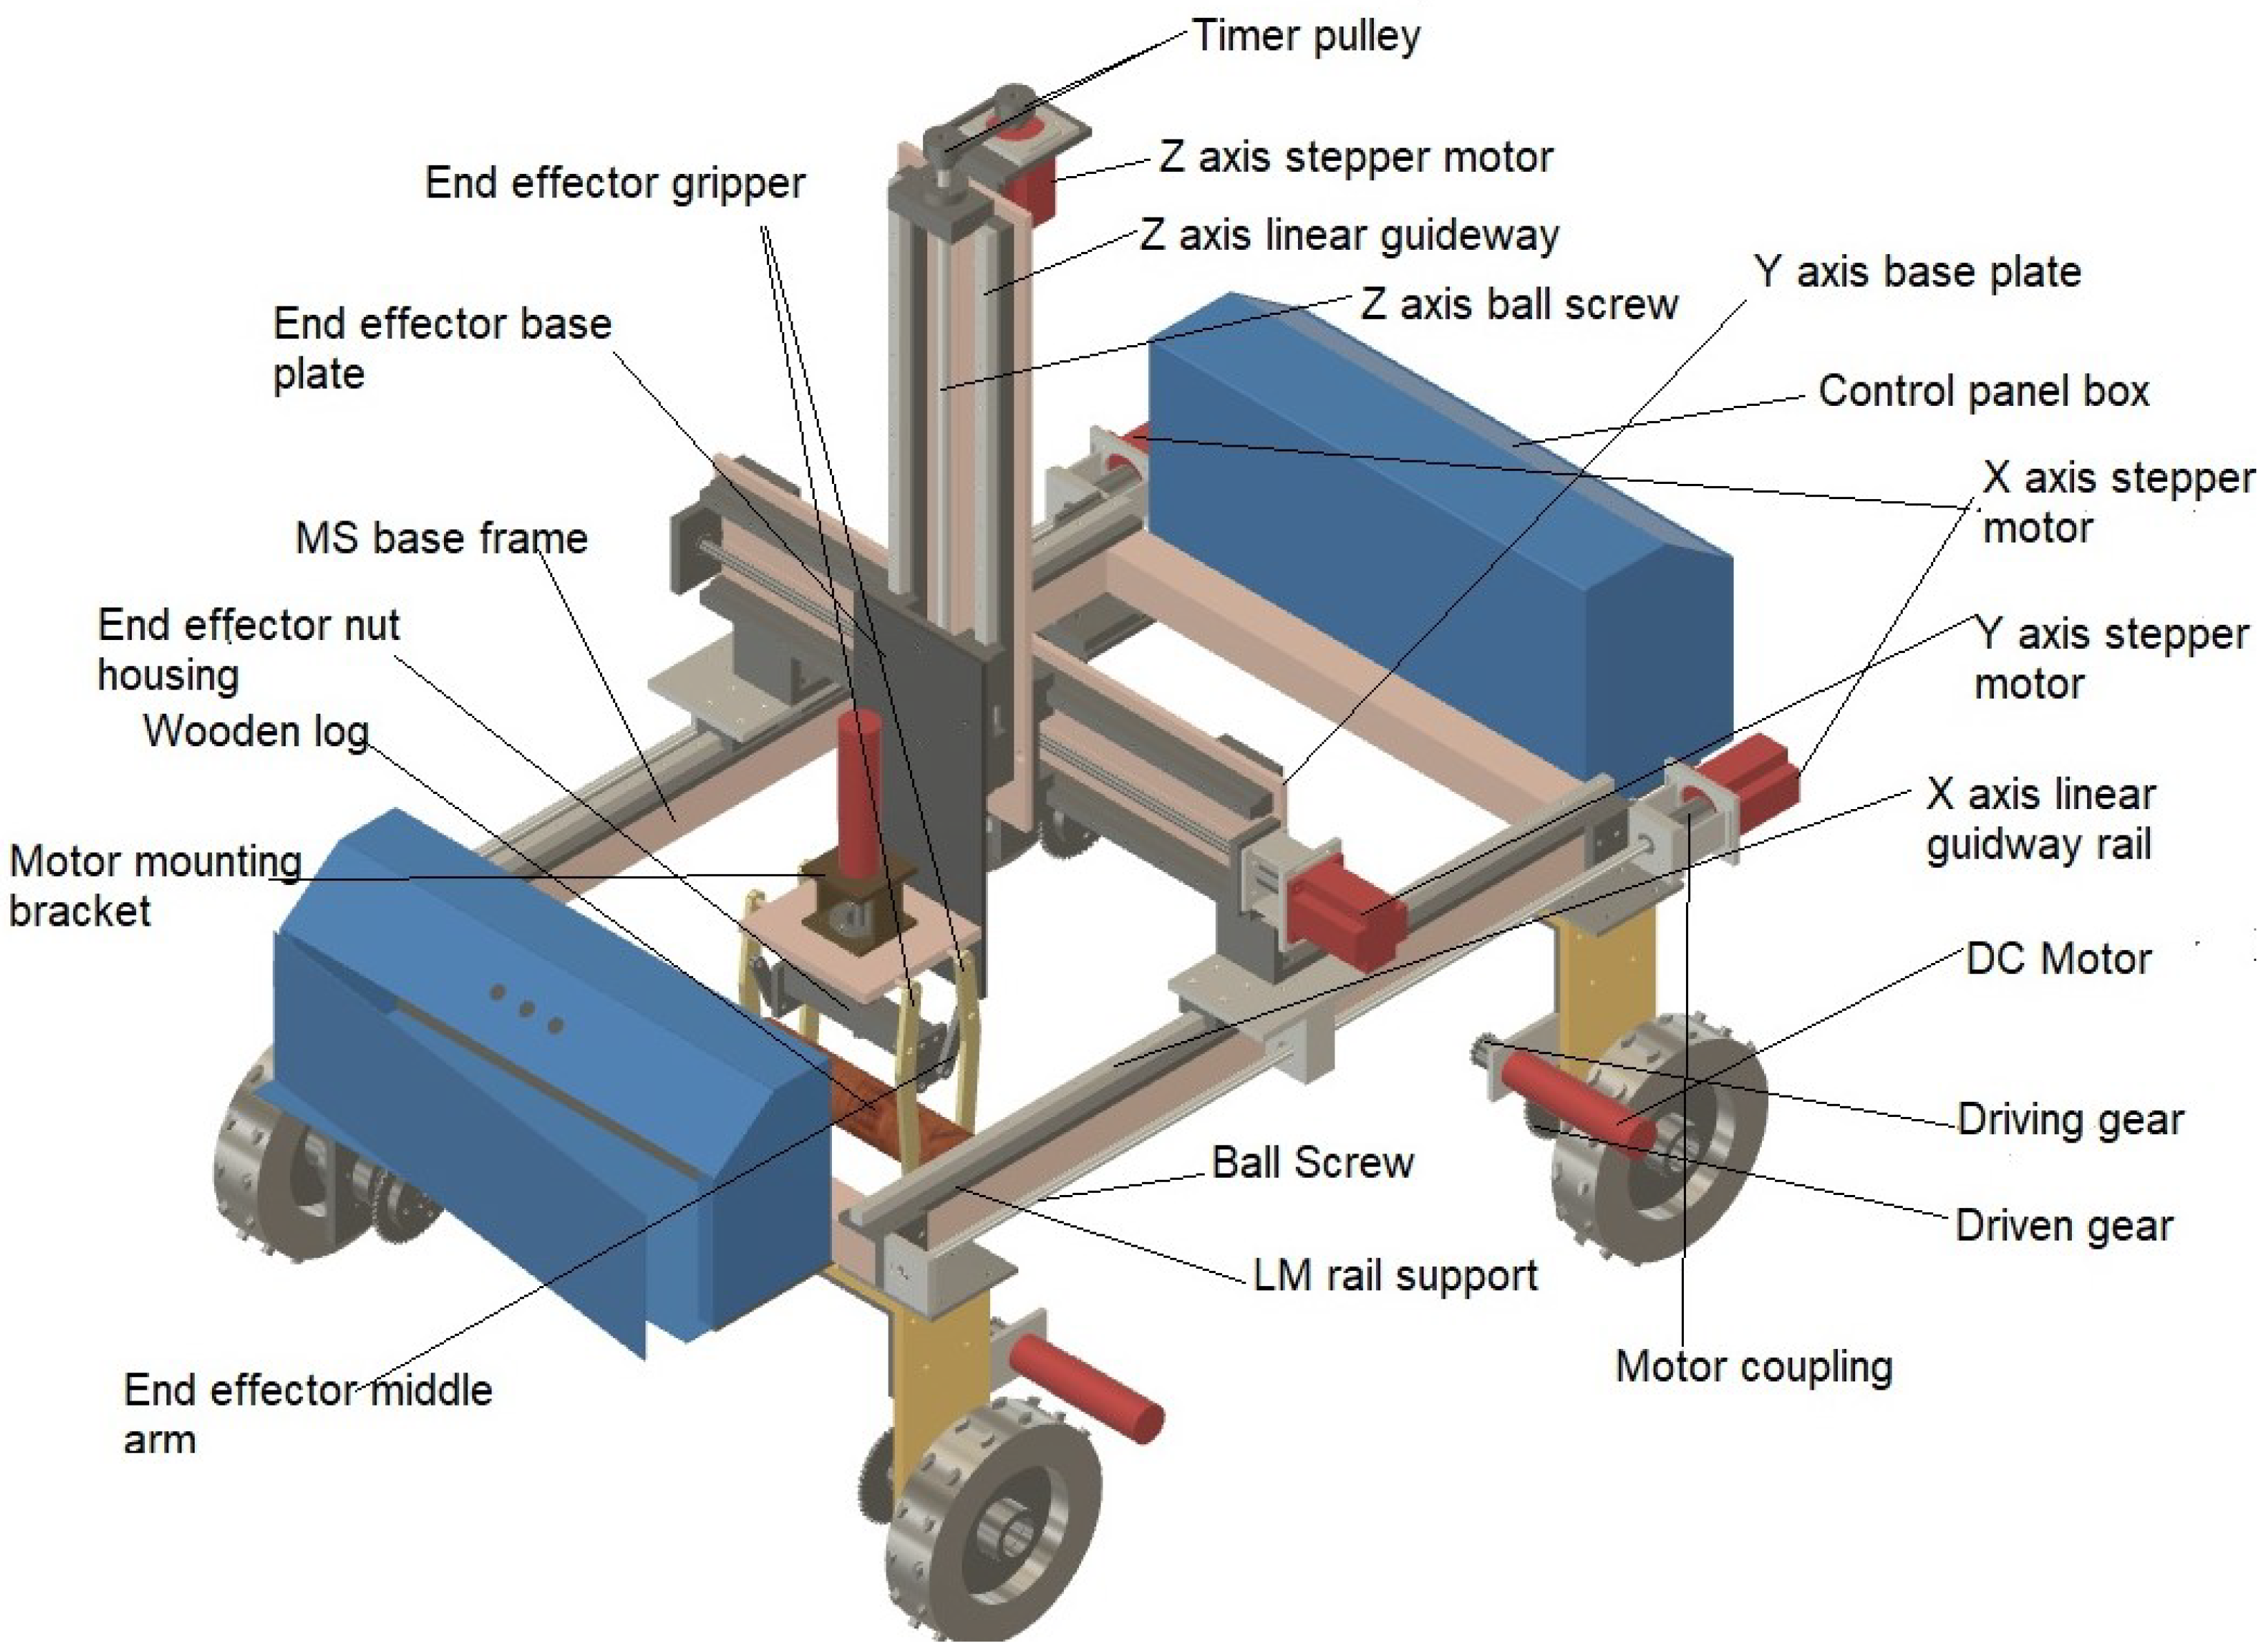 A Review: Design and Fabrication of Manual Seed Sowing Machine